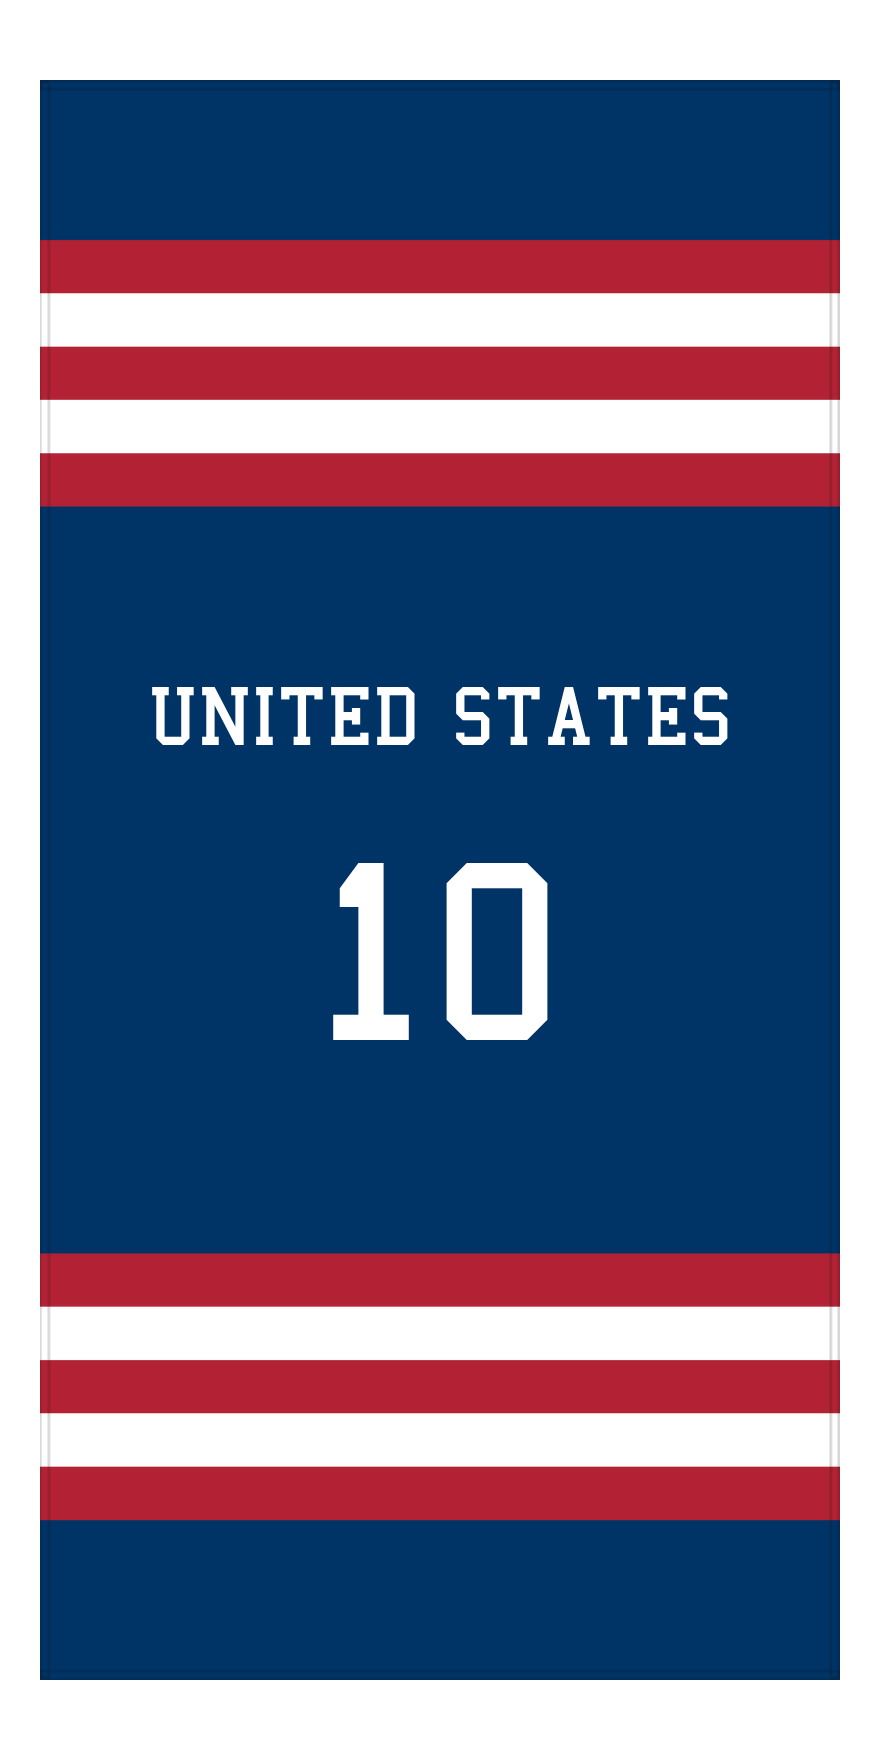 Personalized Jersey Number 2-on-1 Stripes Sports Beach Towel - United States - Vertical Design - Front View